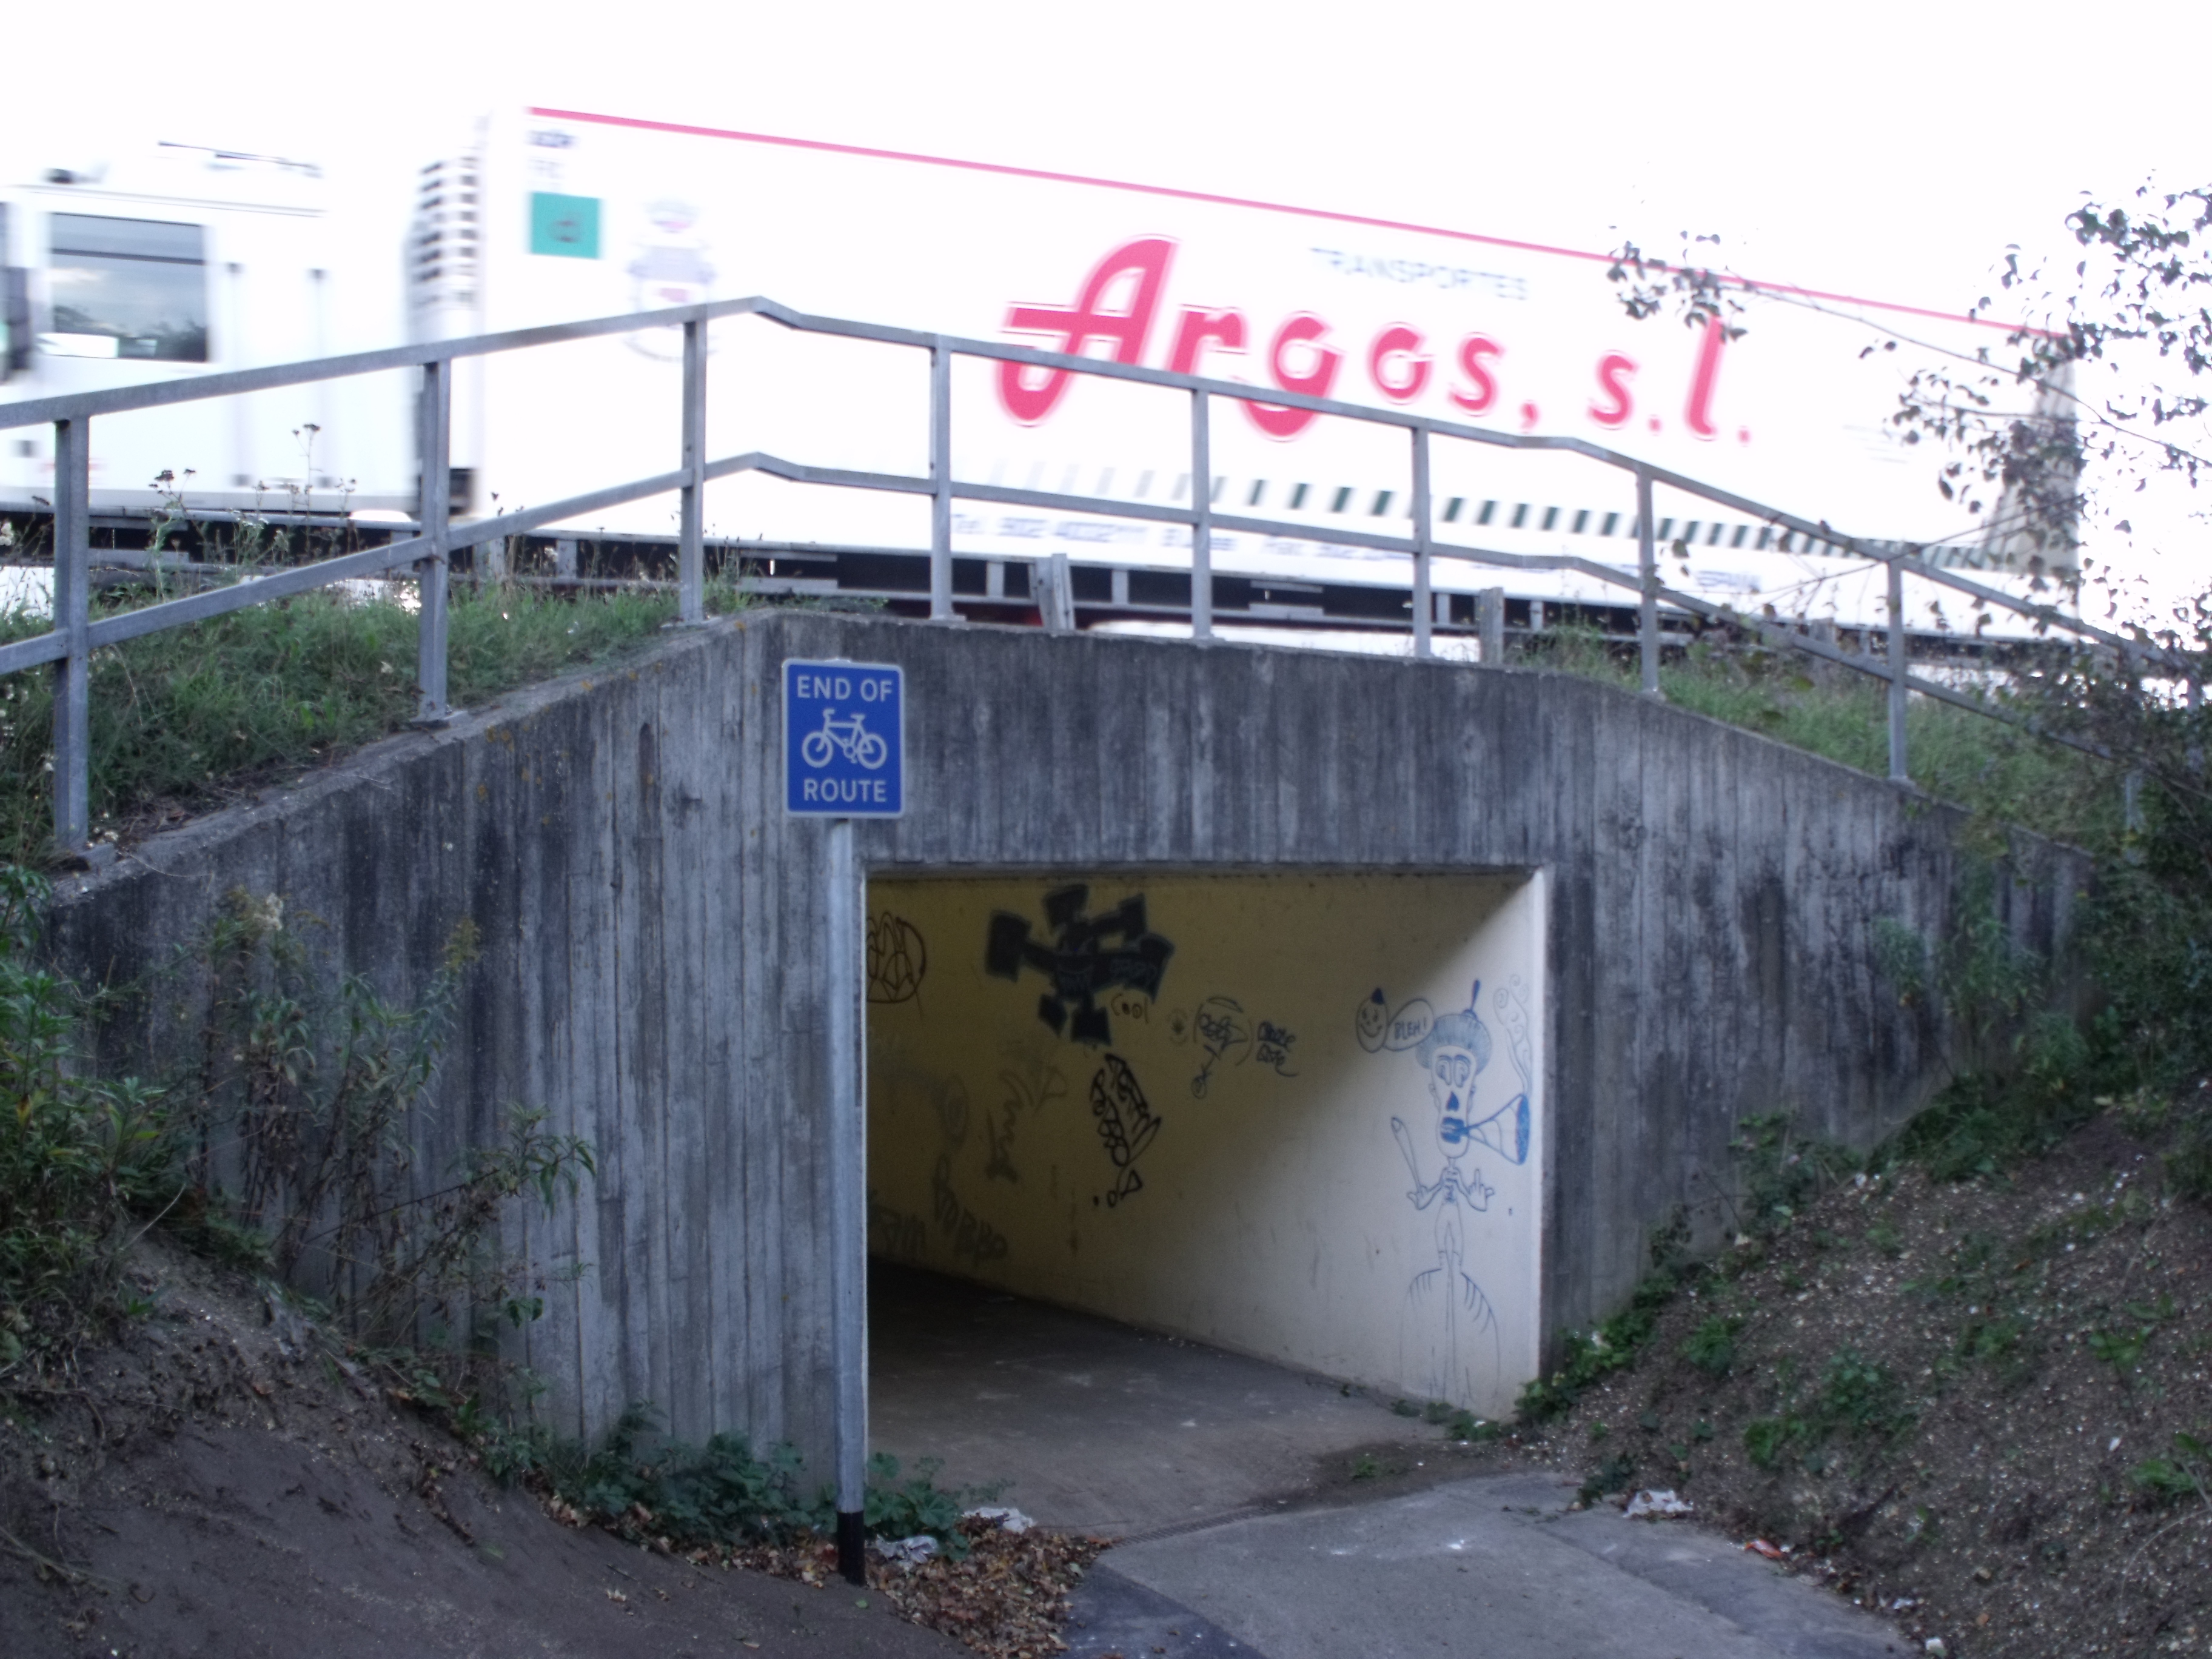 Entrance to underpass at Tesco side